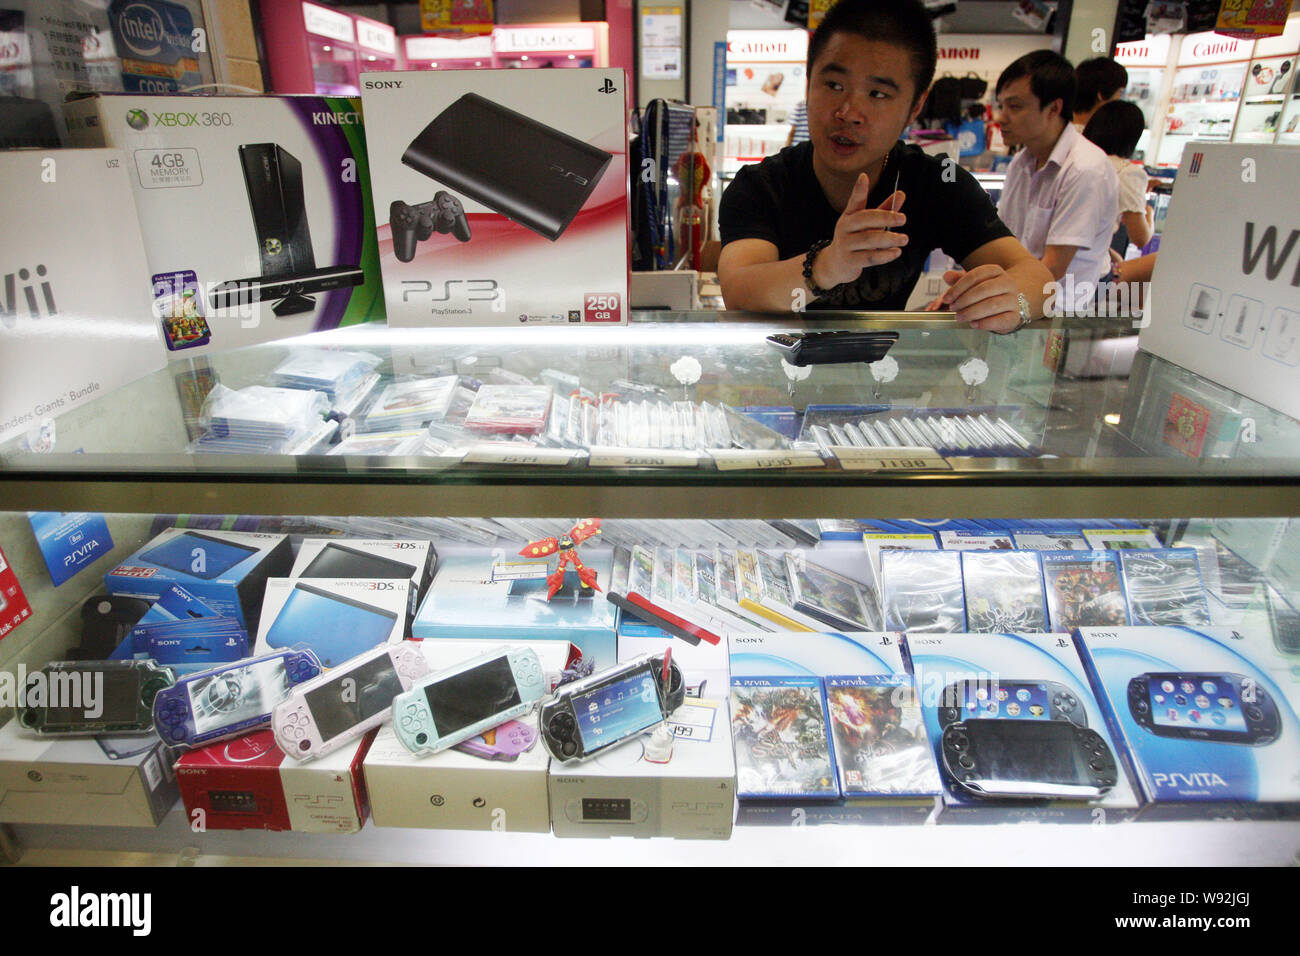 A Salesman Sells Sony Ps3 Psvita Psp Microsoft Xbox 360 Nintendo Wii And 3ds Game Consoles At A Stall In A Digital Products Mall In Shanghai Chin Stock Photo Alamy